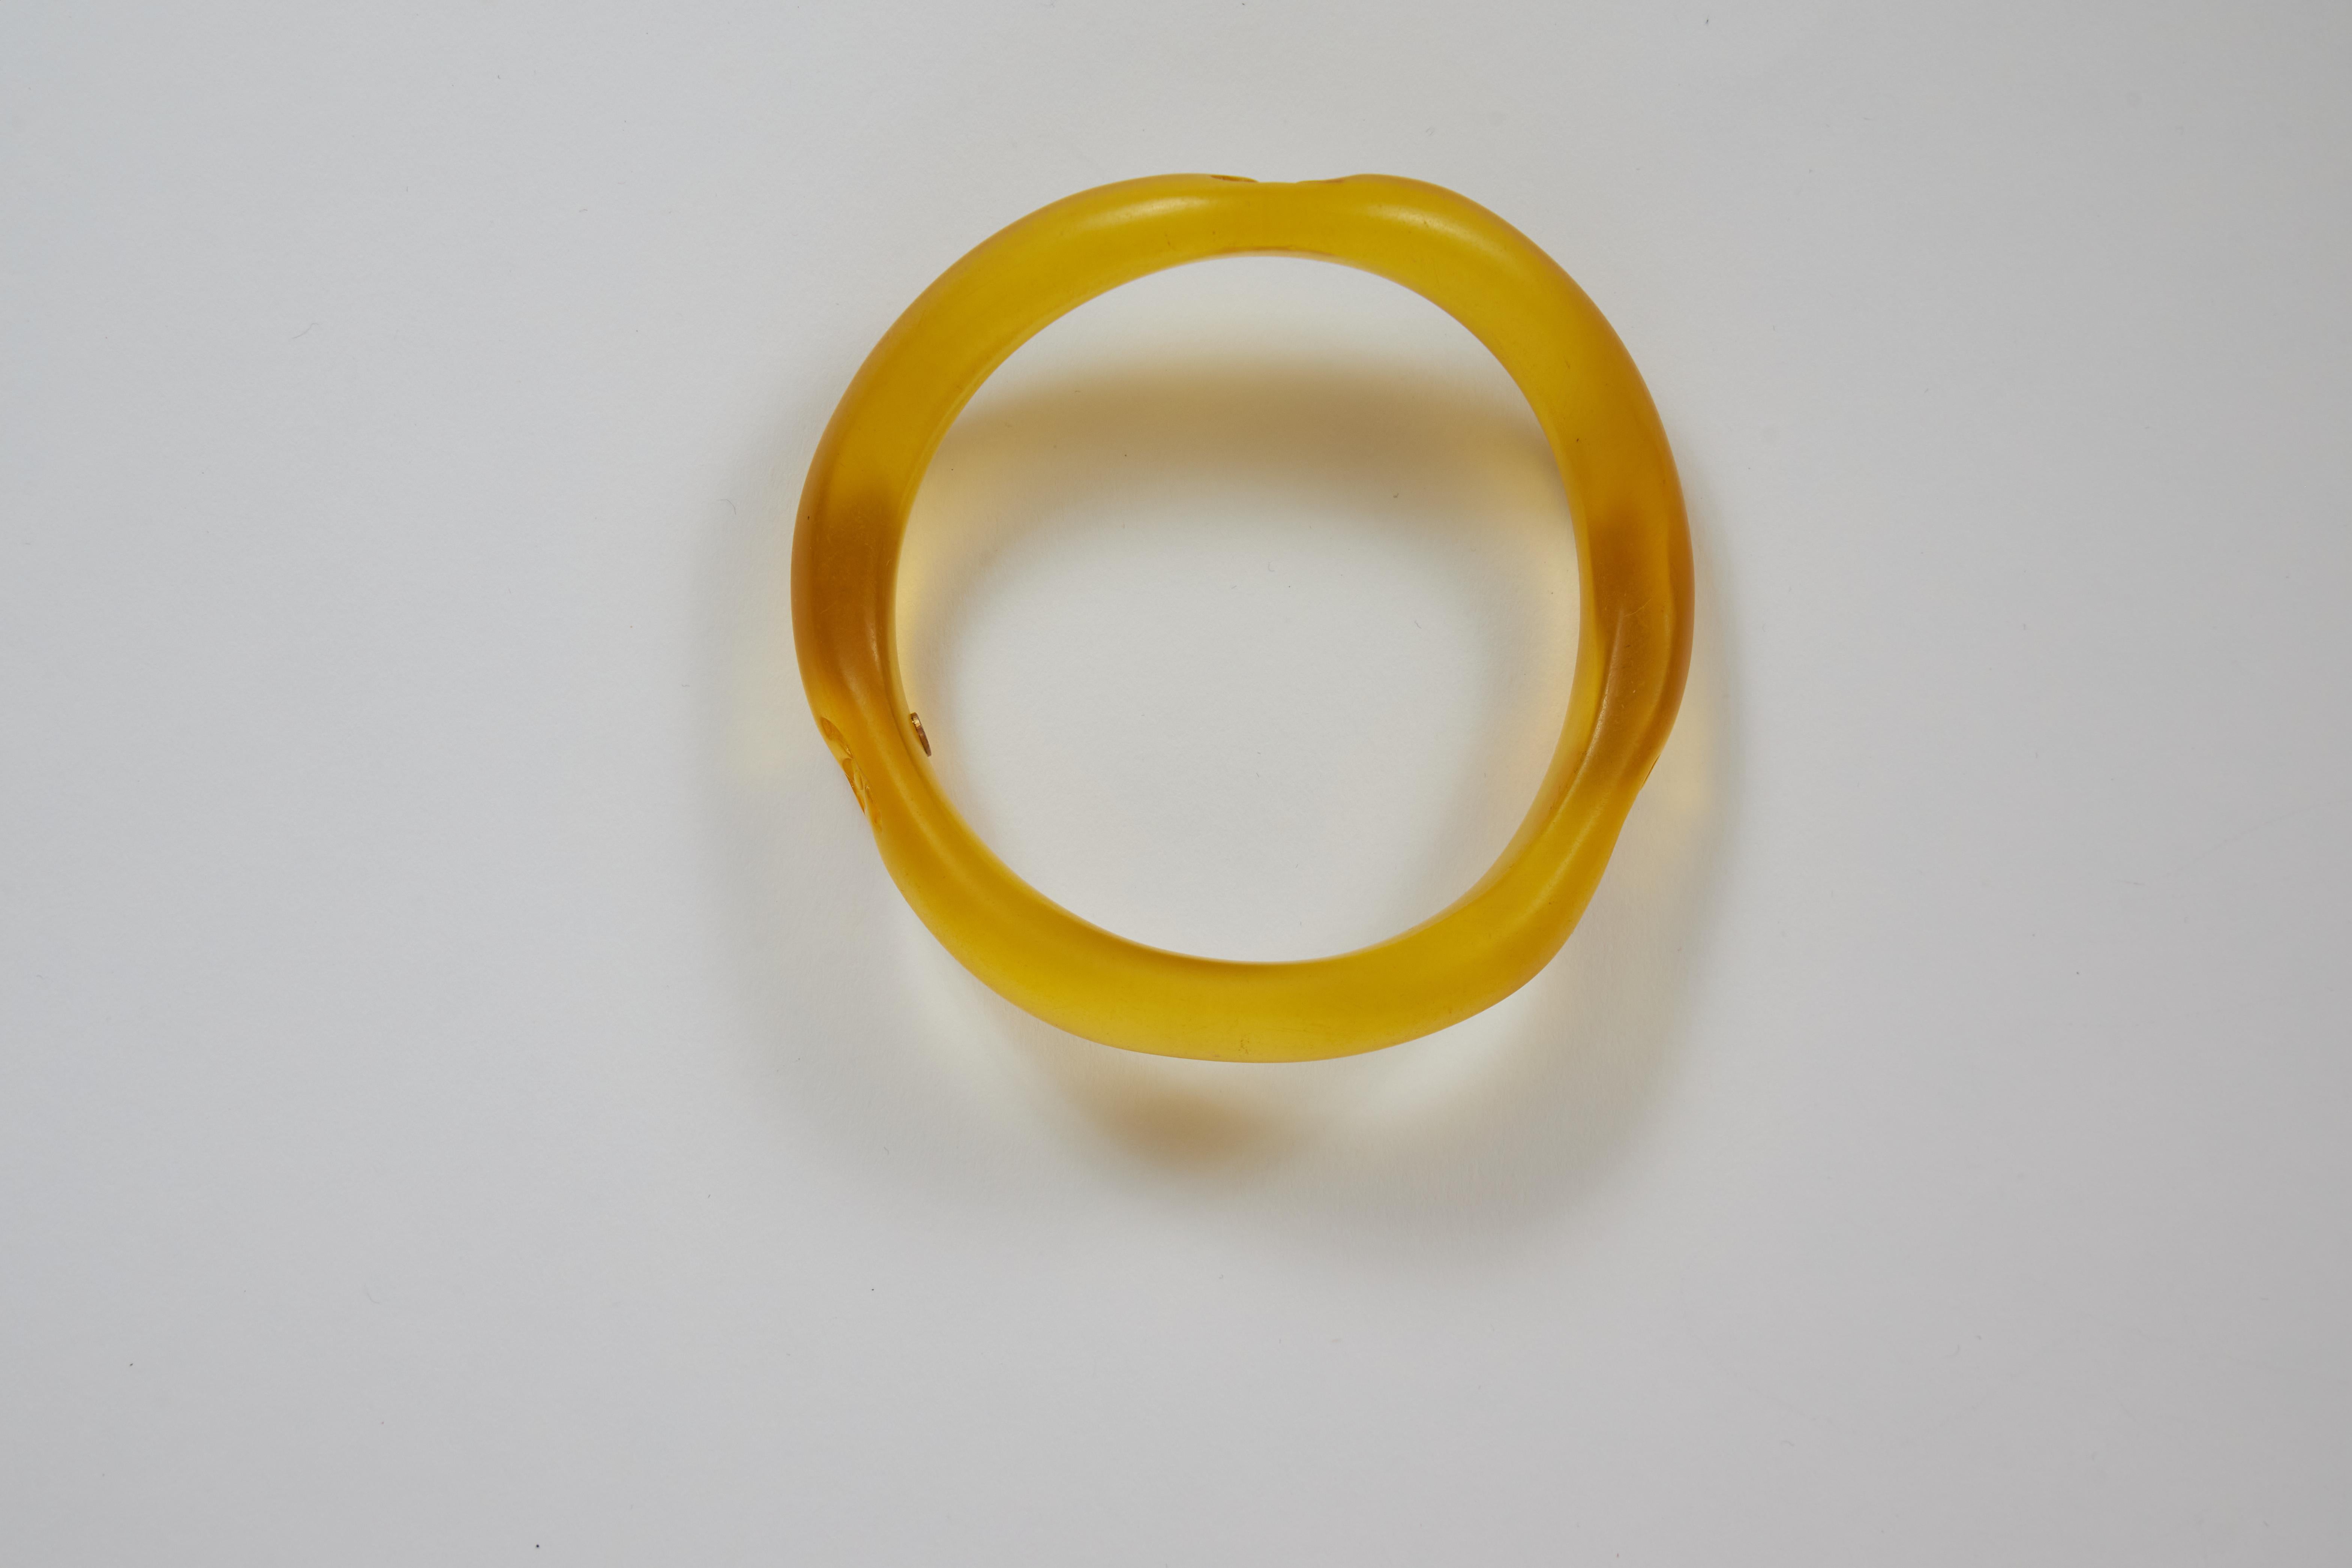 Chanel Irregular Yellow Resin Bangle In Good Condition For Sale In West Hollywood, CA